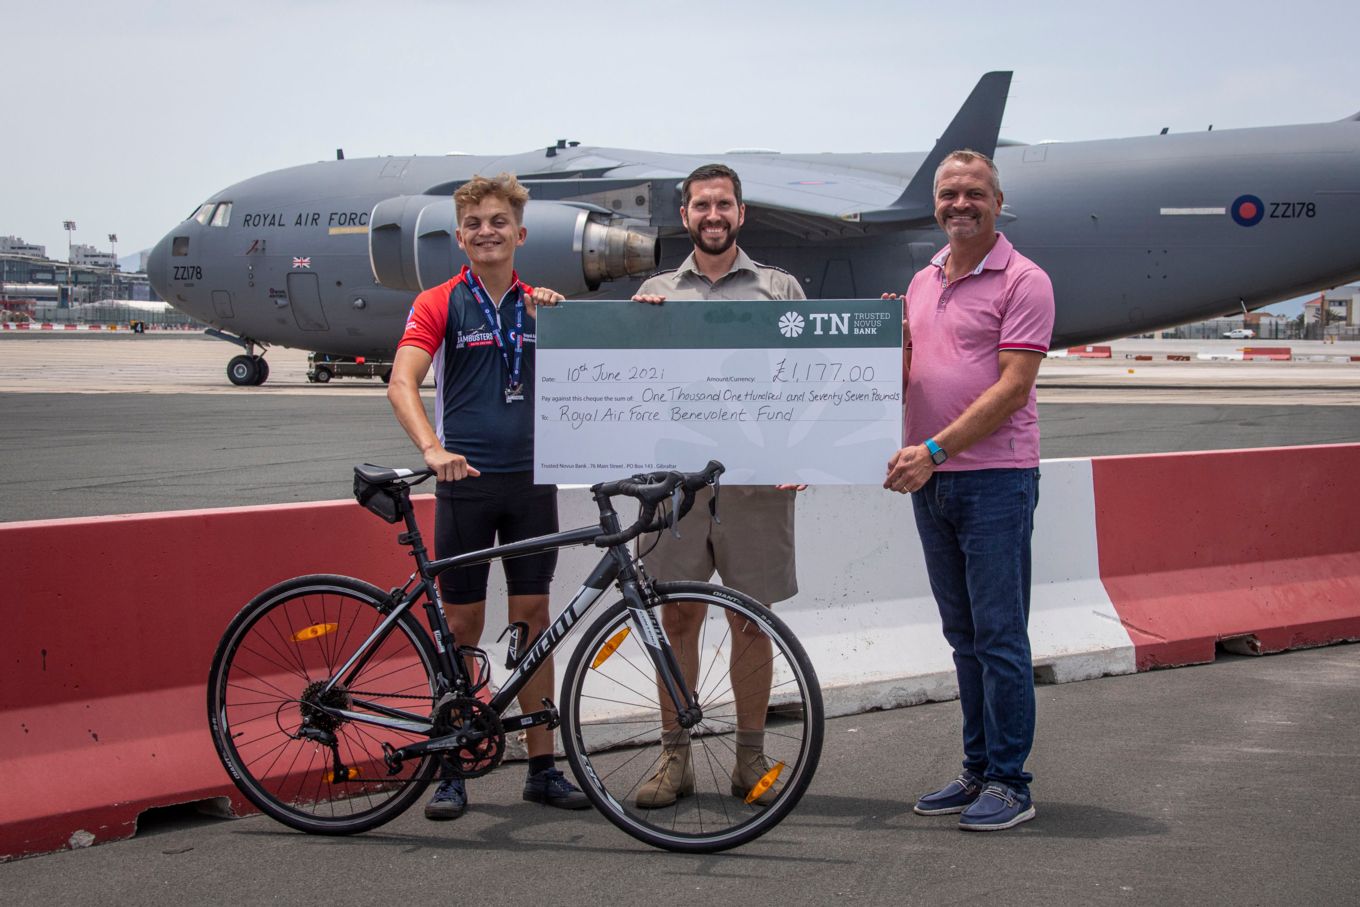 Oliver holds the cheque with his bicycle and a Globemaster in the background.